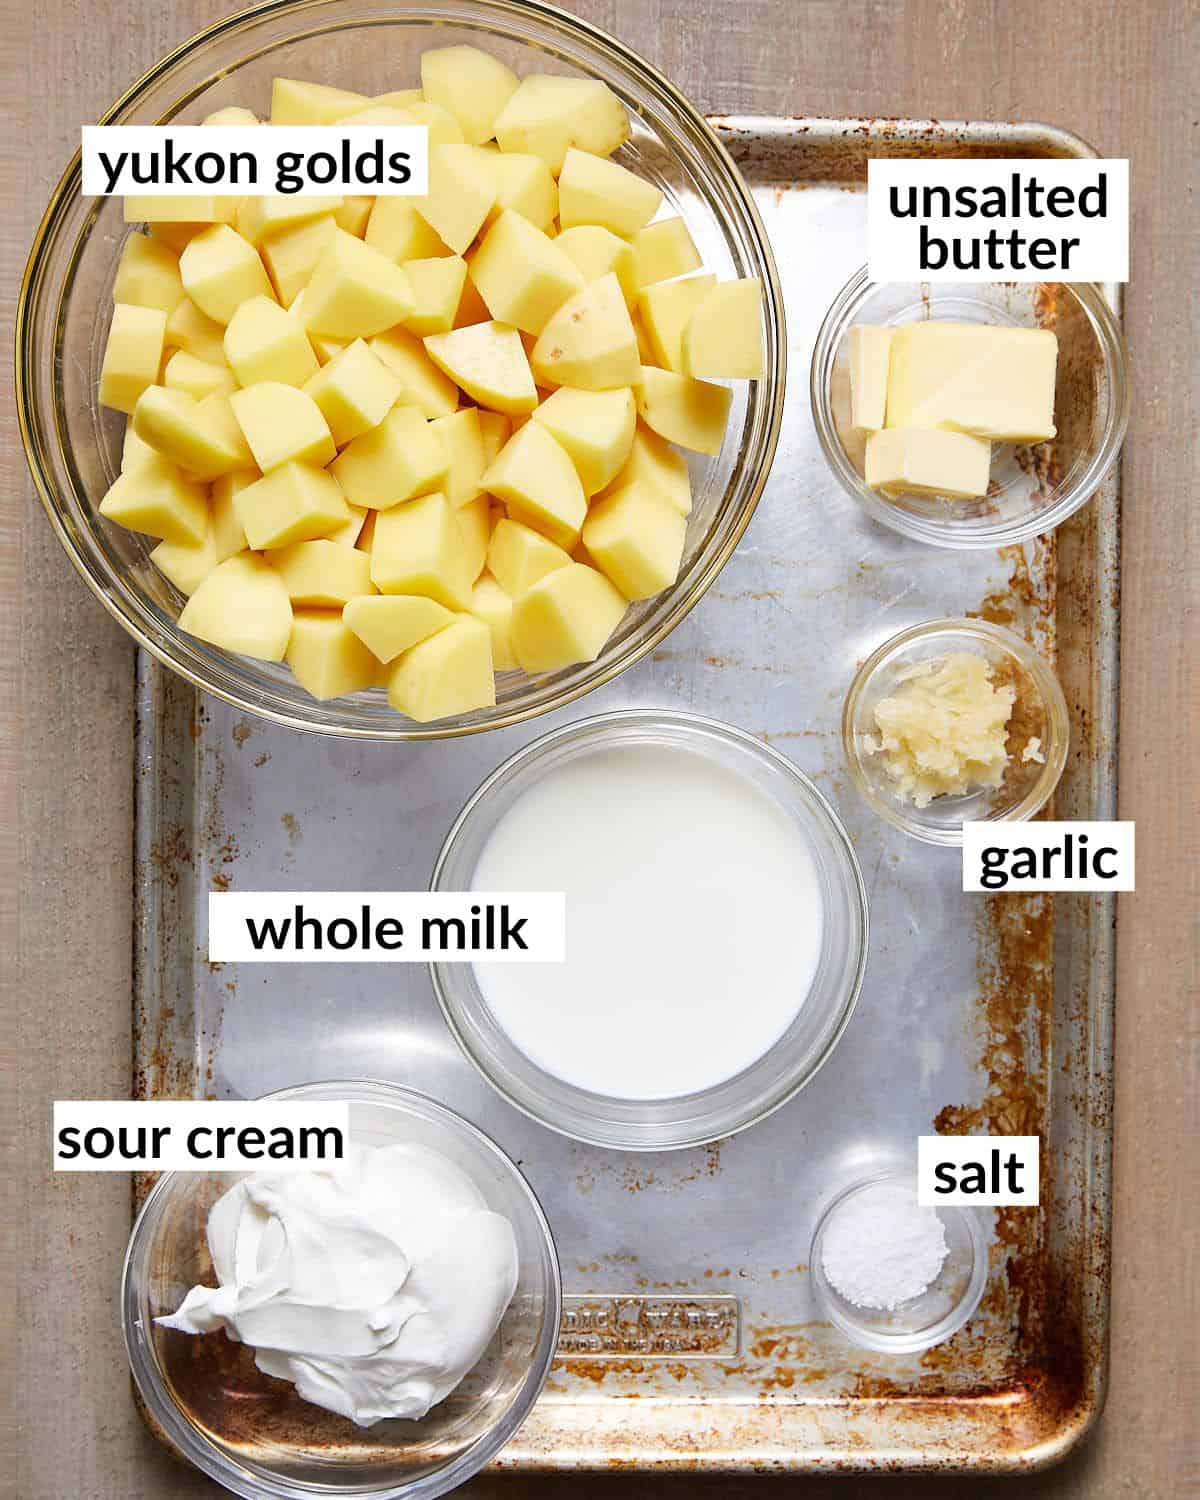 Overhead image of ingredients needed for yukon gold mashed potatoes. 